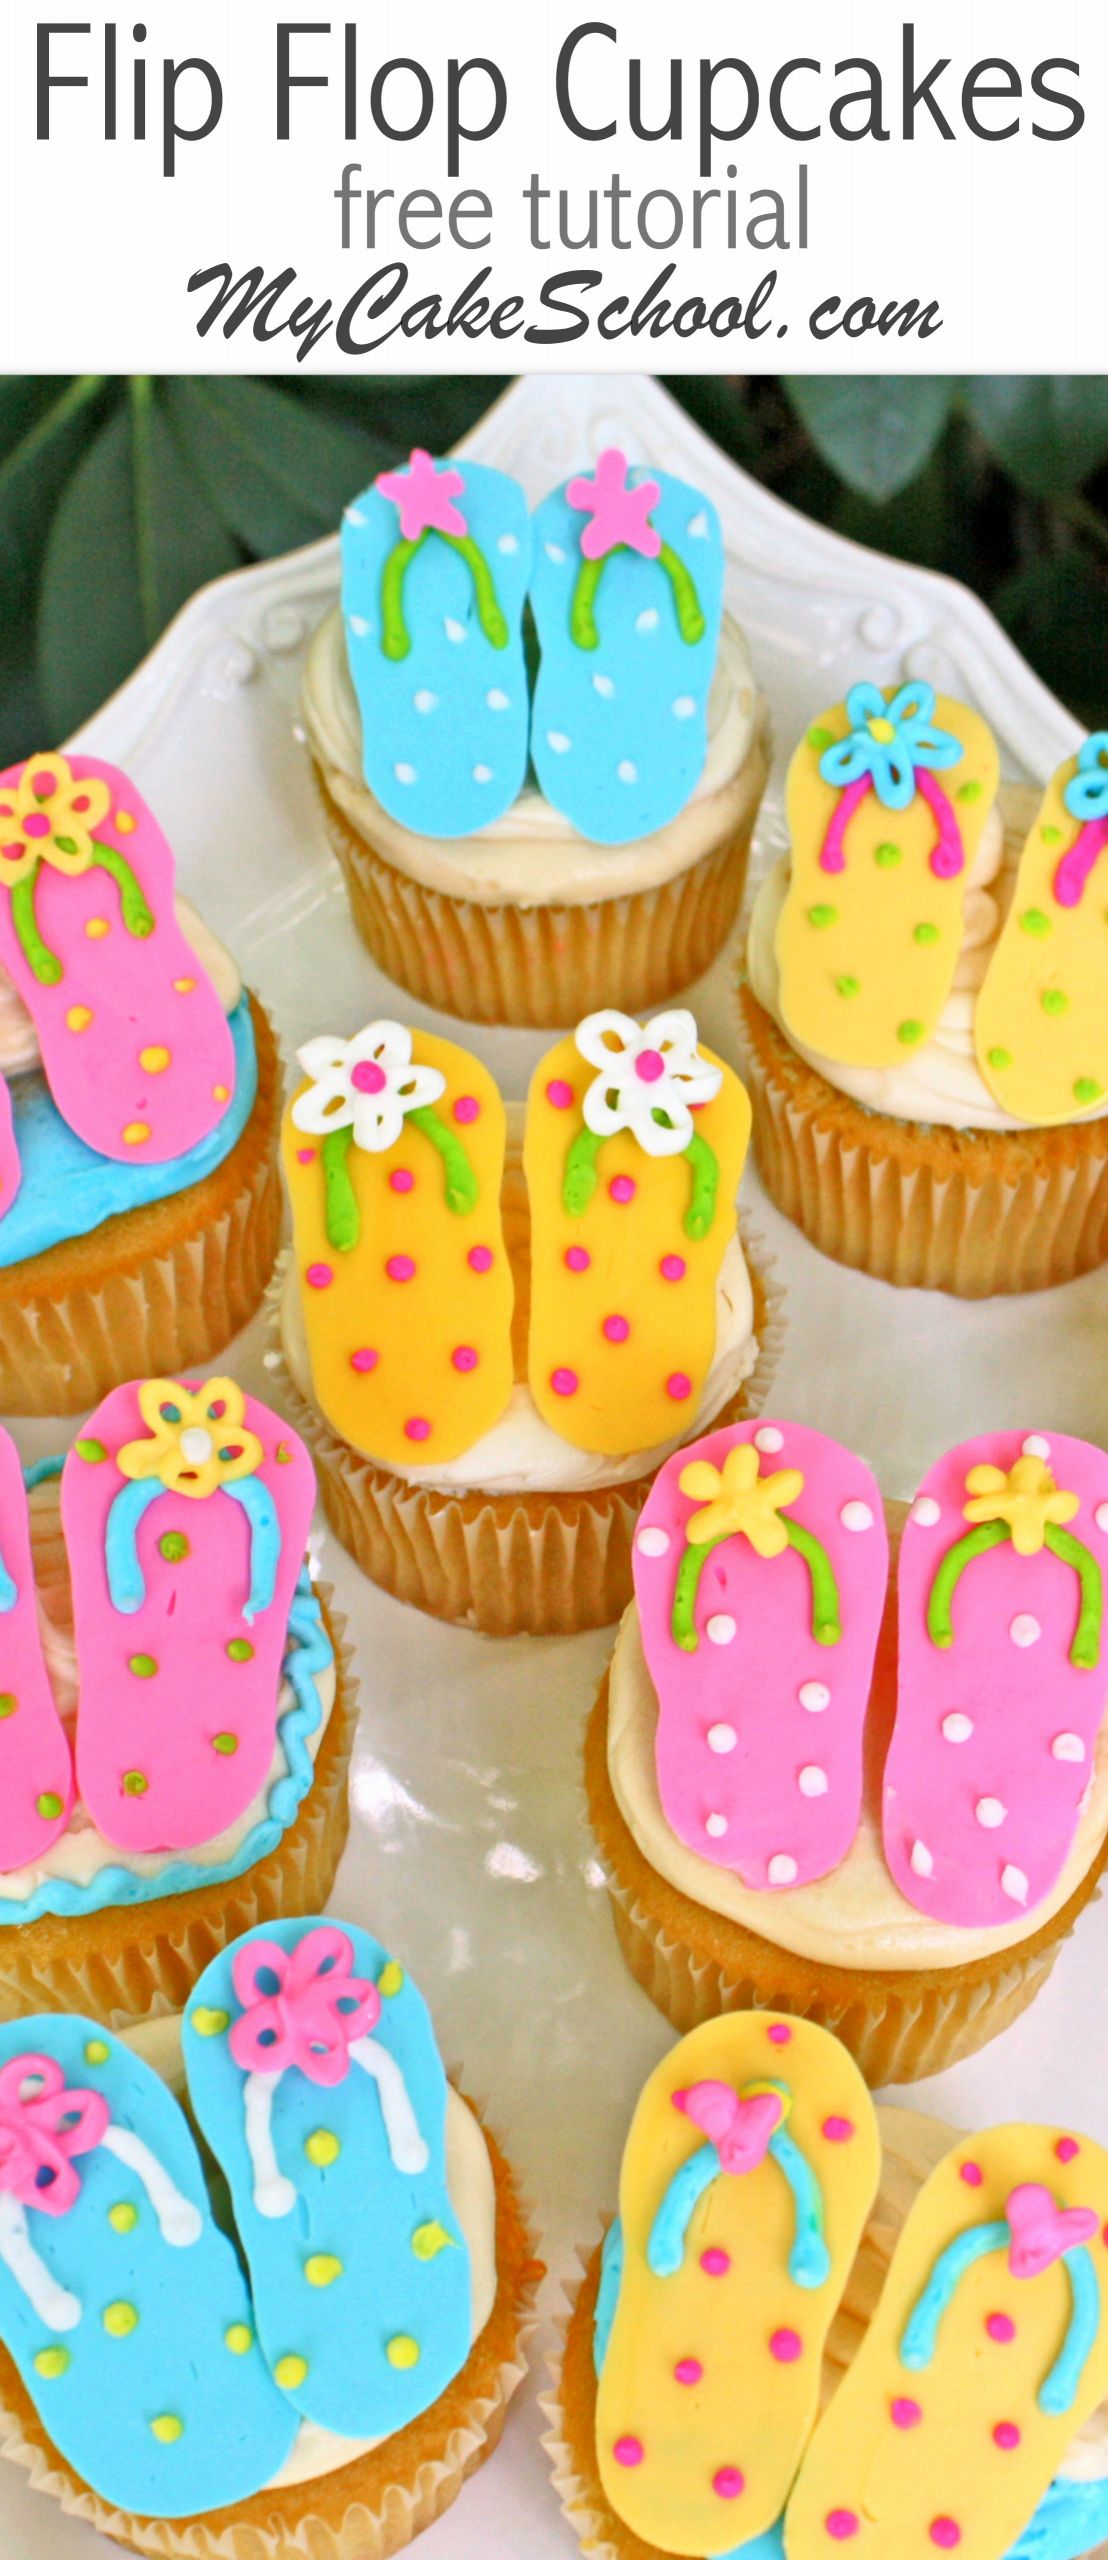 Summer Themed Cupcakes
 Flip Flop Cupcakes Free Tutorial